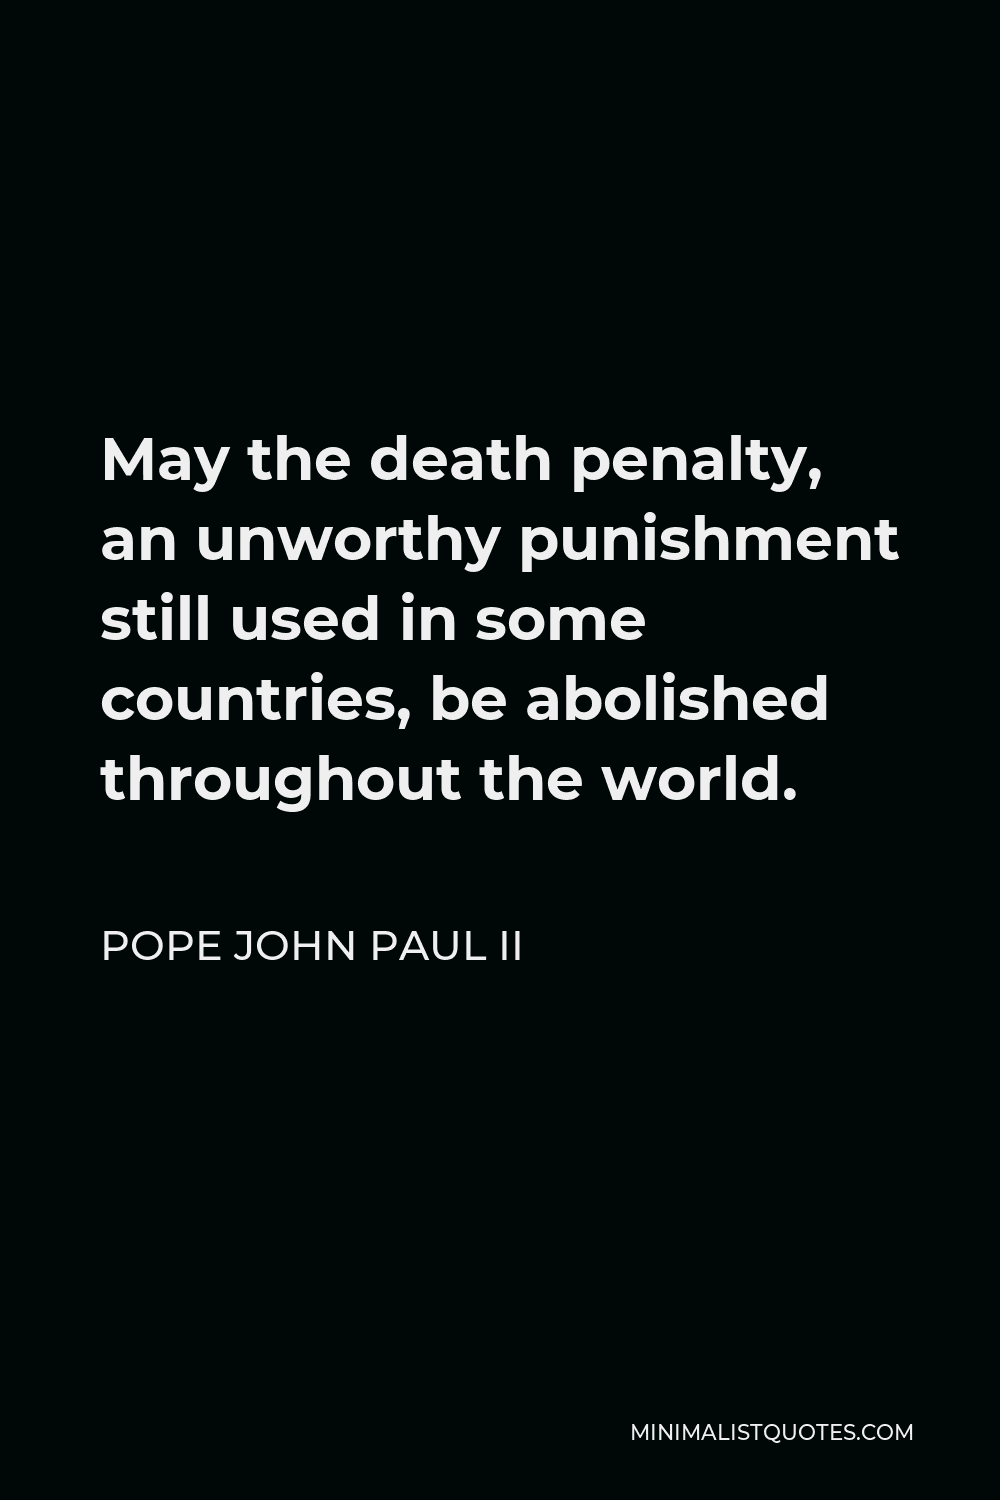 Pope John Paul II Quote - May the death penalty, an unworthy punishment still used in some countries, be abolished throughout the world.